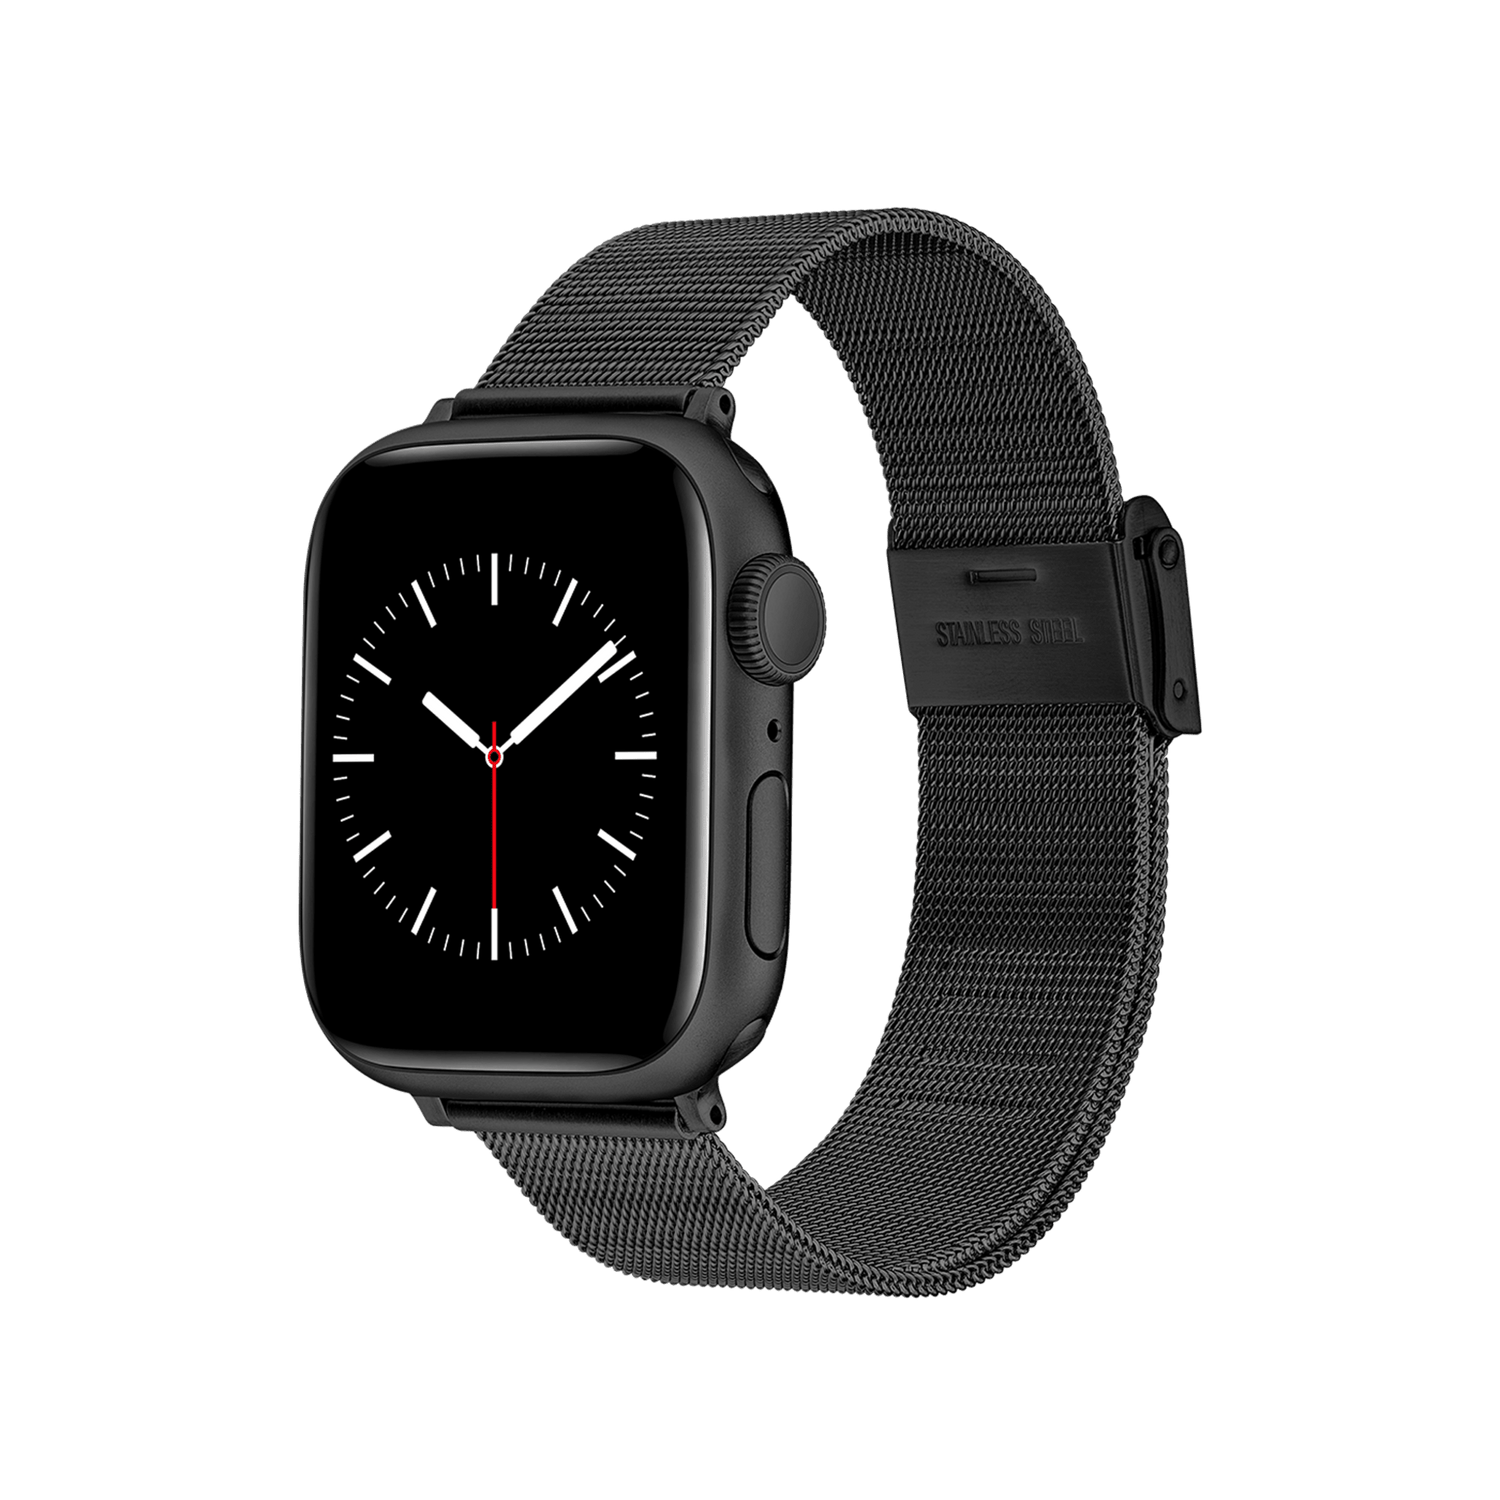 Smartwatch Cases - Cases for Apple Watch | DW